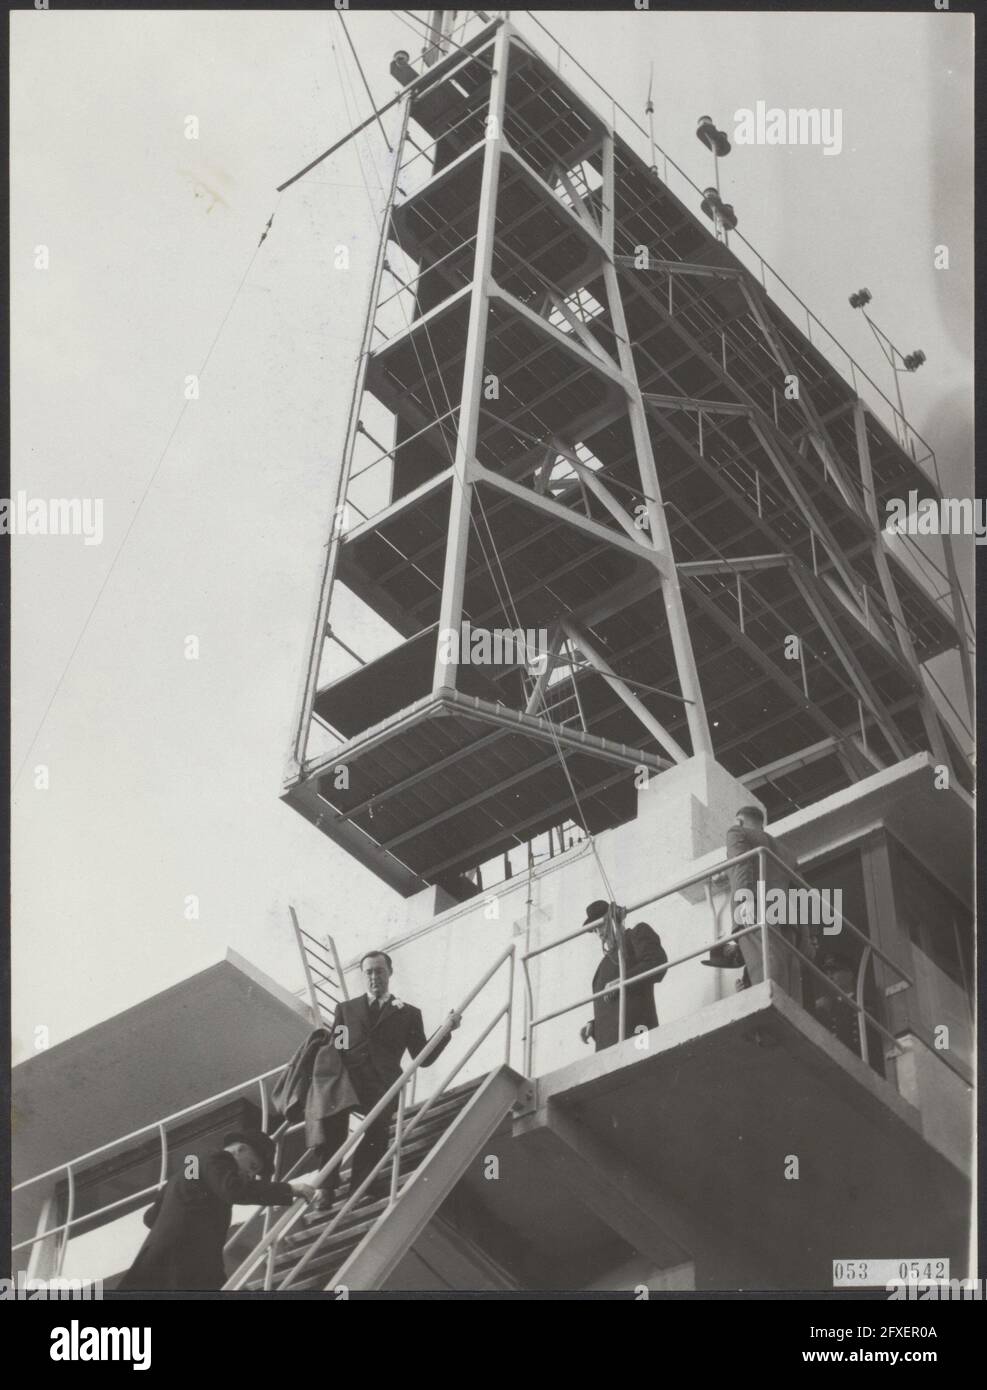 At IJmuiden, Prince Bernhard operated the radar installation for entering the North Sea Canal on the semaphore. Prince Bernhard or the semaphore, Below the mayor of Amsterdam mr. A d'Ailly, November 1, 1951, ports, radars, The Netherlands, 20th century press agency photo, news to remember, documentary, historic photography 1945-1990, visual stories, human history of the Twentieth Century, capturing moments in time Stock Photo